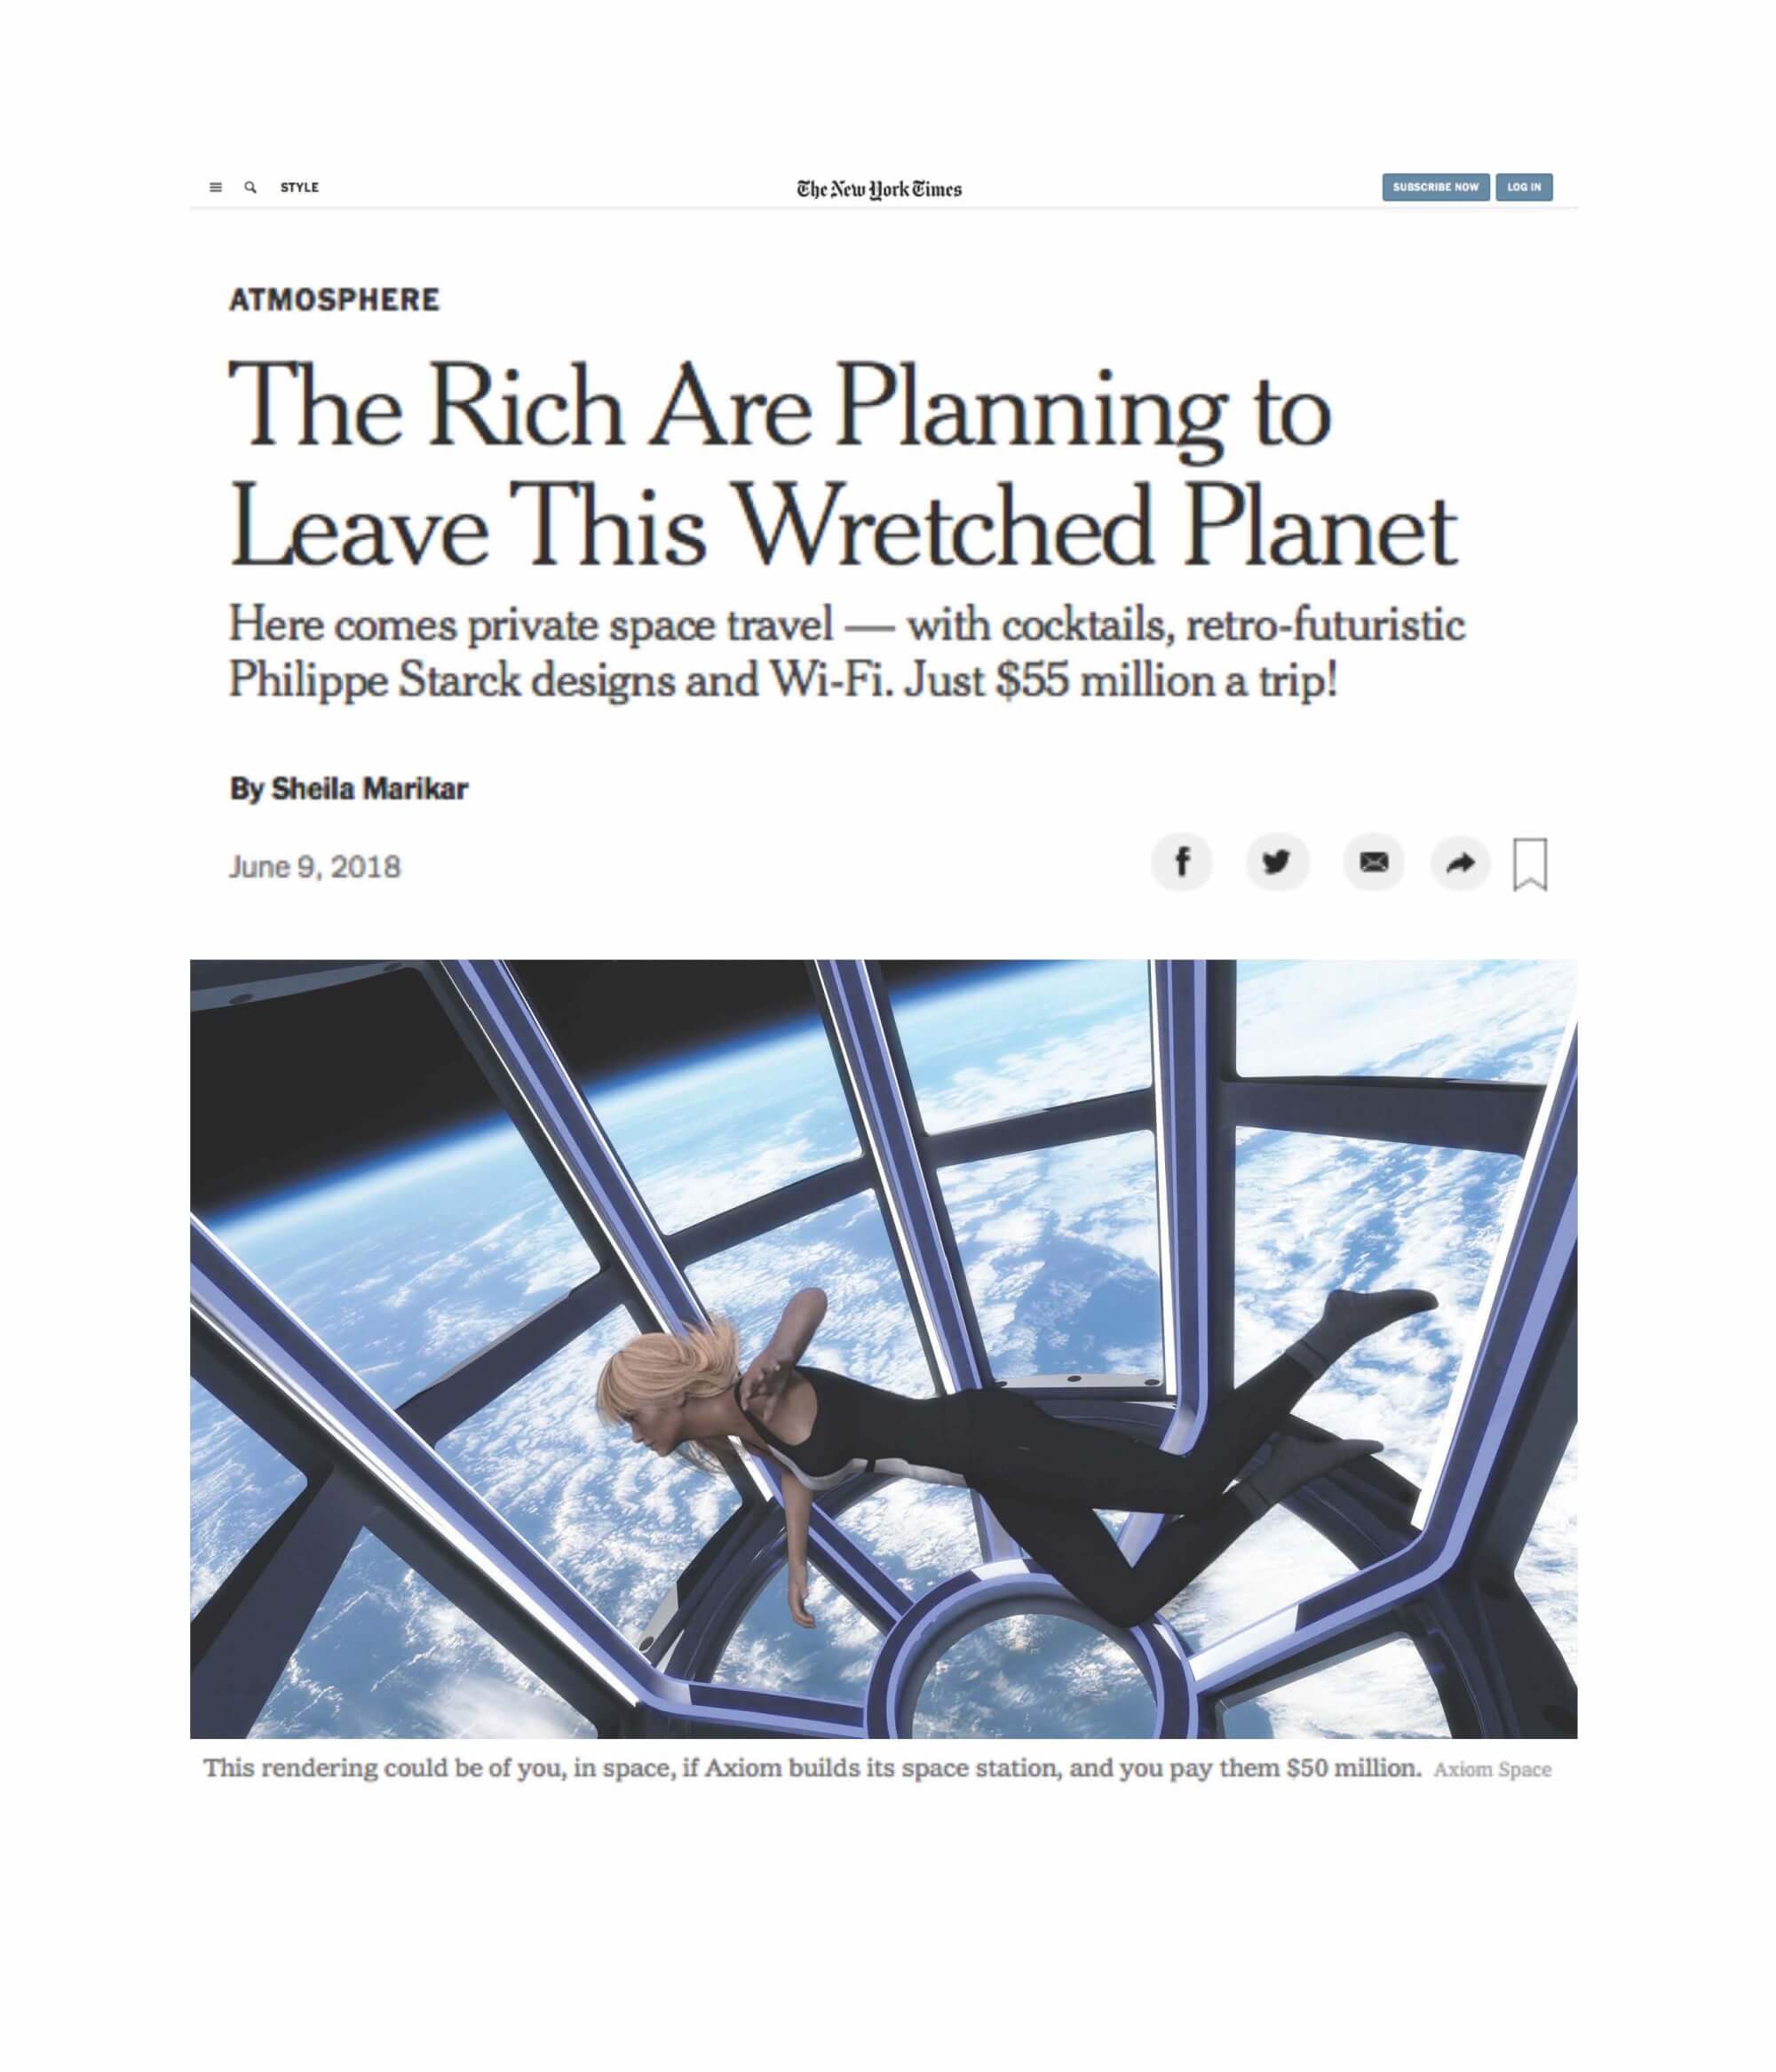 The Rich Are Planning to Leave This Wretched Planet